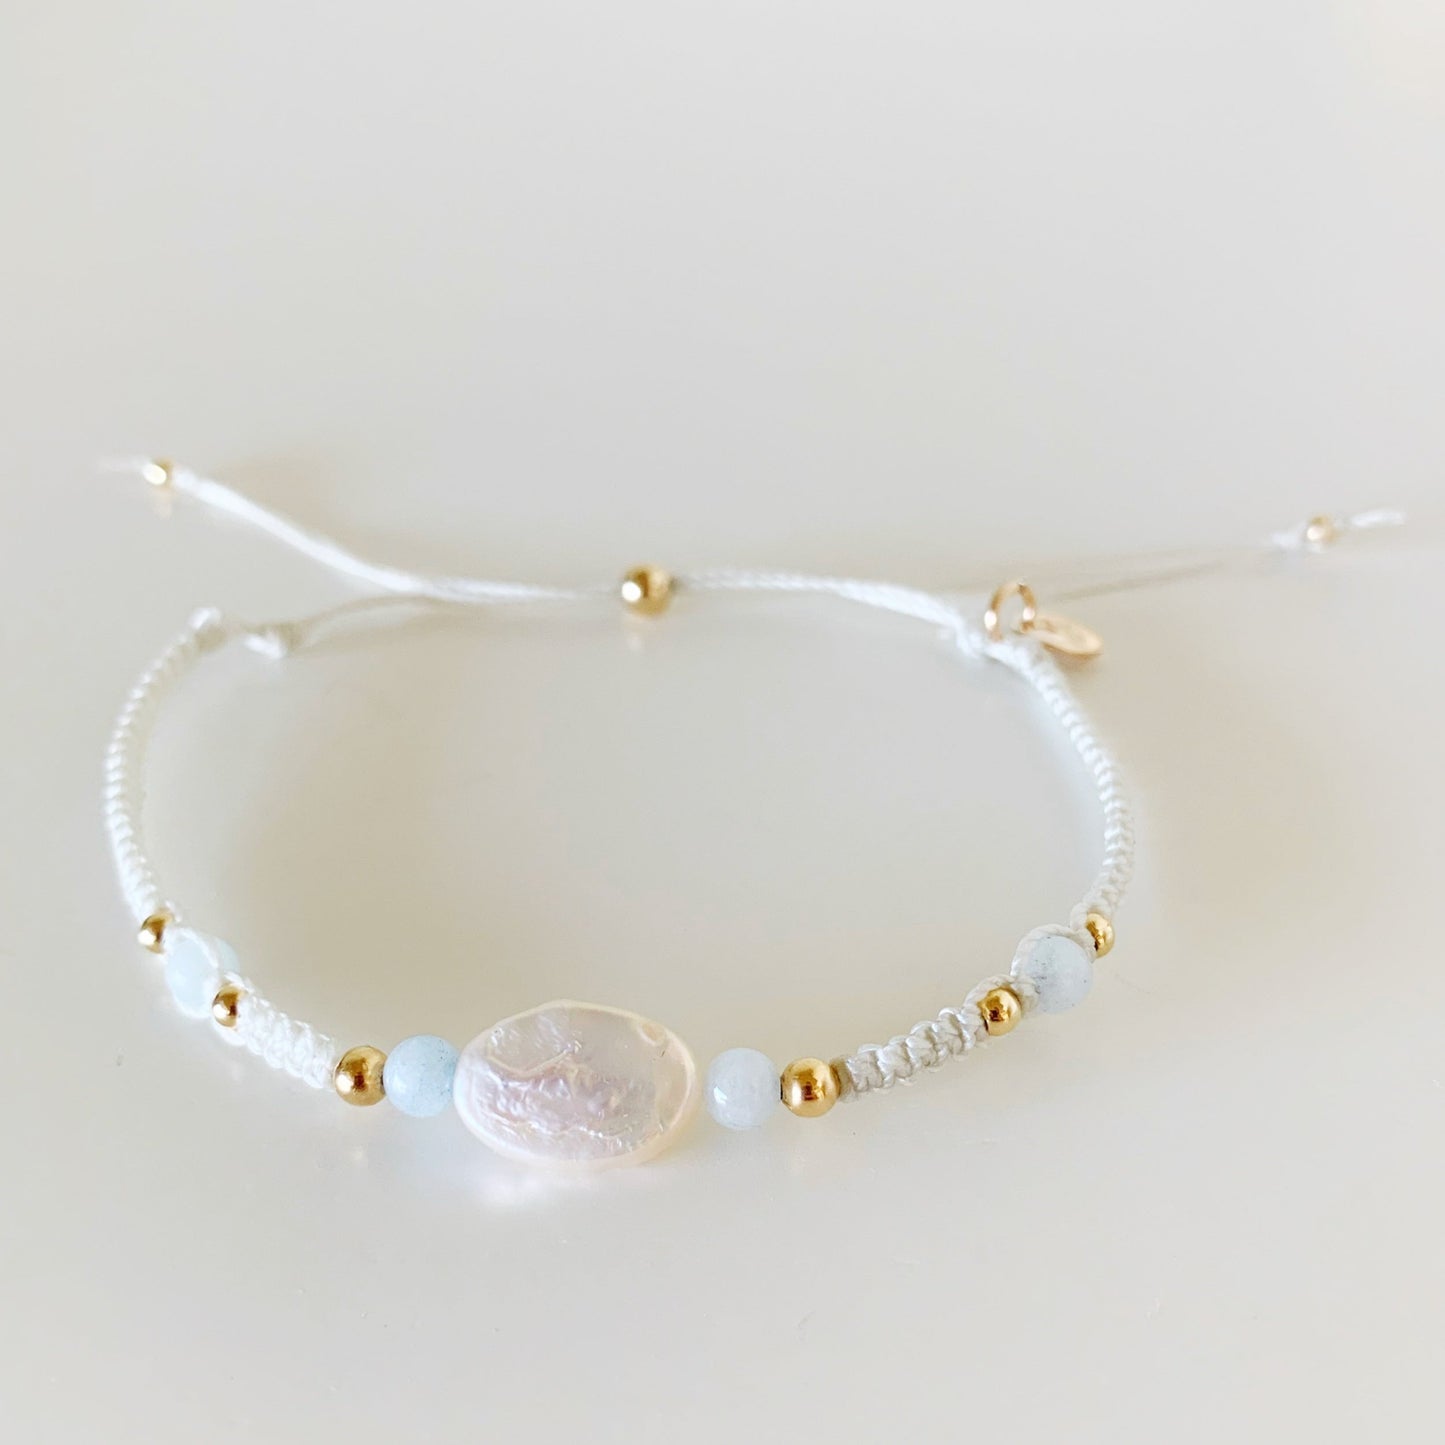 the world is your oyster bracelet by mermaids and madeleines is designed with white shell color cord with freshwater oval pearl at the center with aquamarine beads on either side. this bracelet is photographed from the front on a white surface